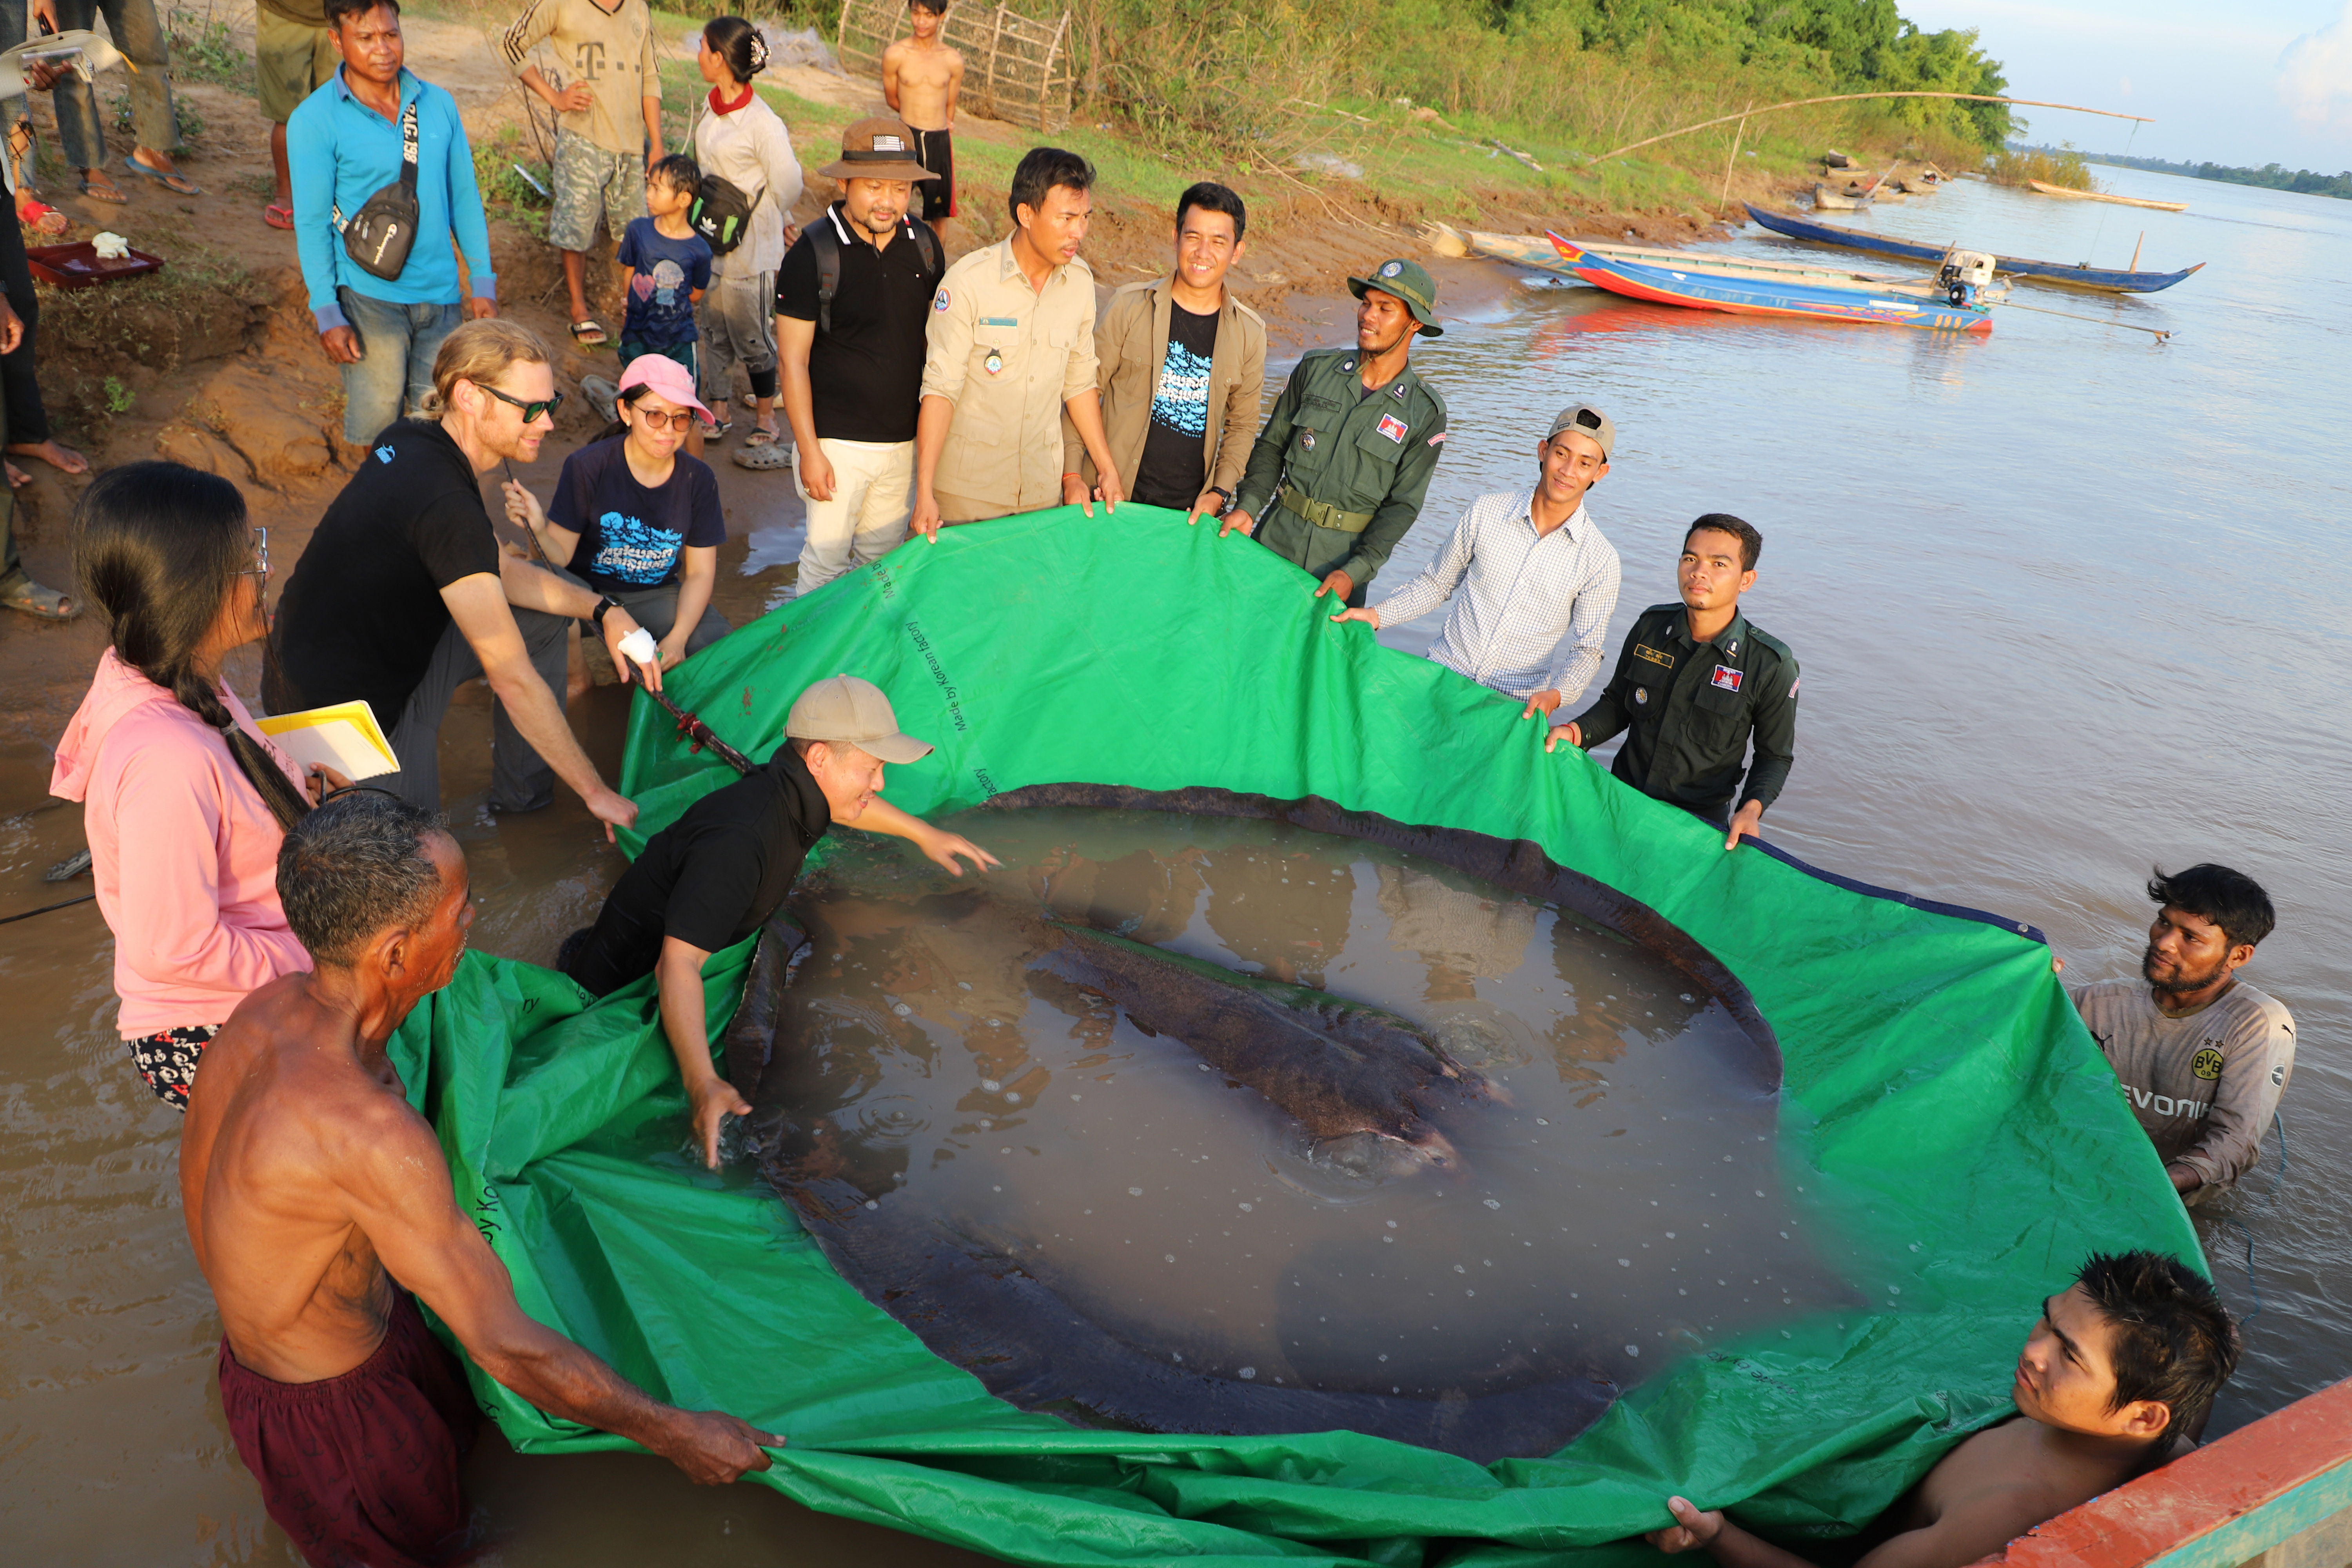 A team of Cambodian and American scientists and researchers, along with Fisheries Administration officials, prepares to release a giant freshwater stingray back into the Mekong River in the north-eastern province of Stung Treng, Cambodia